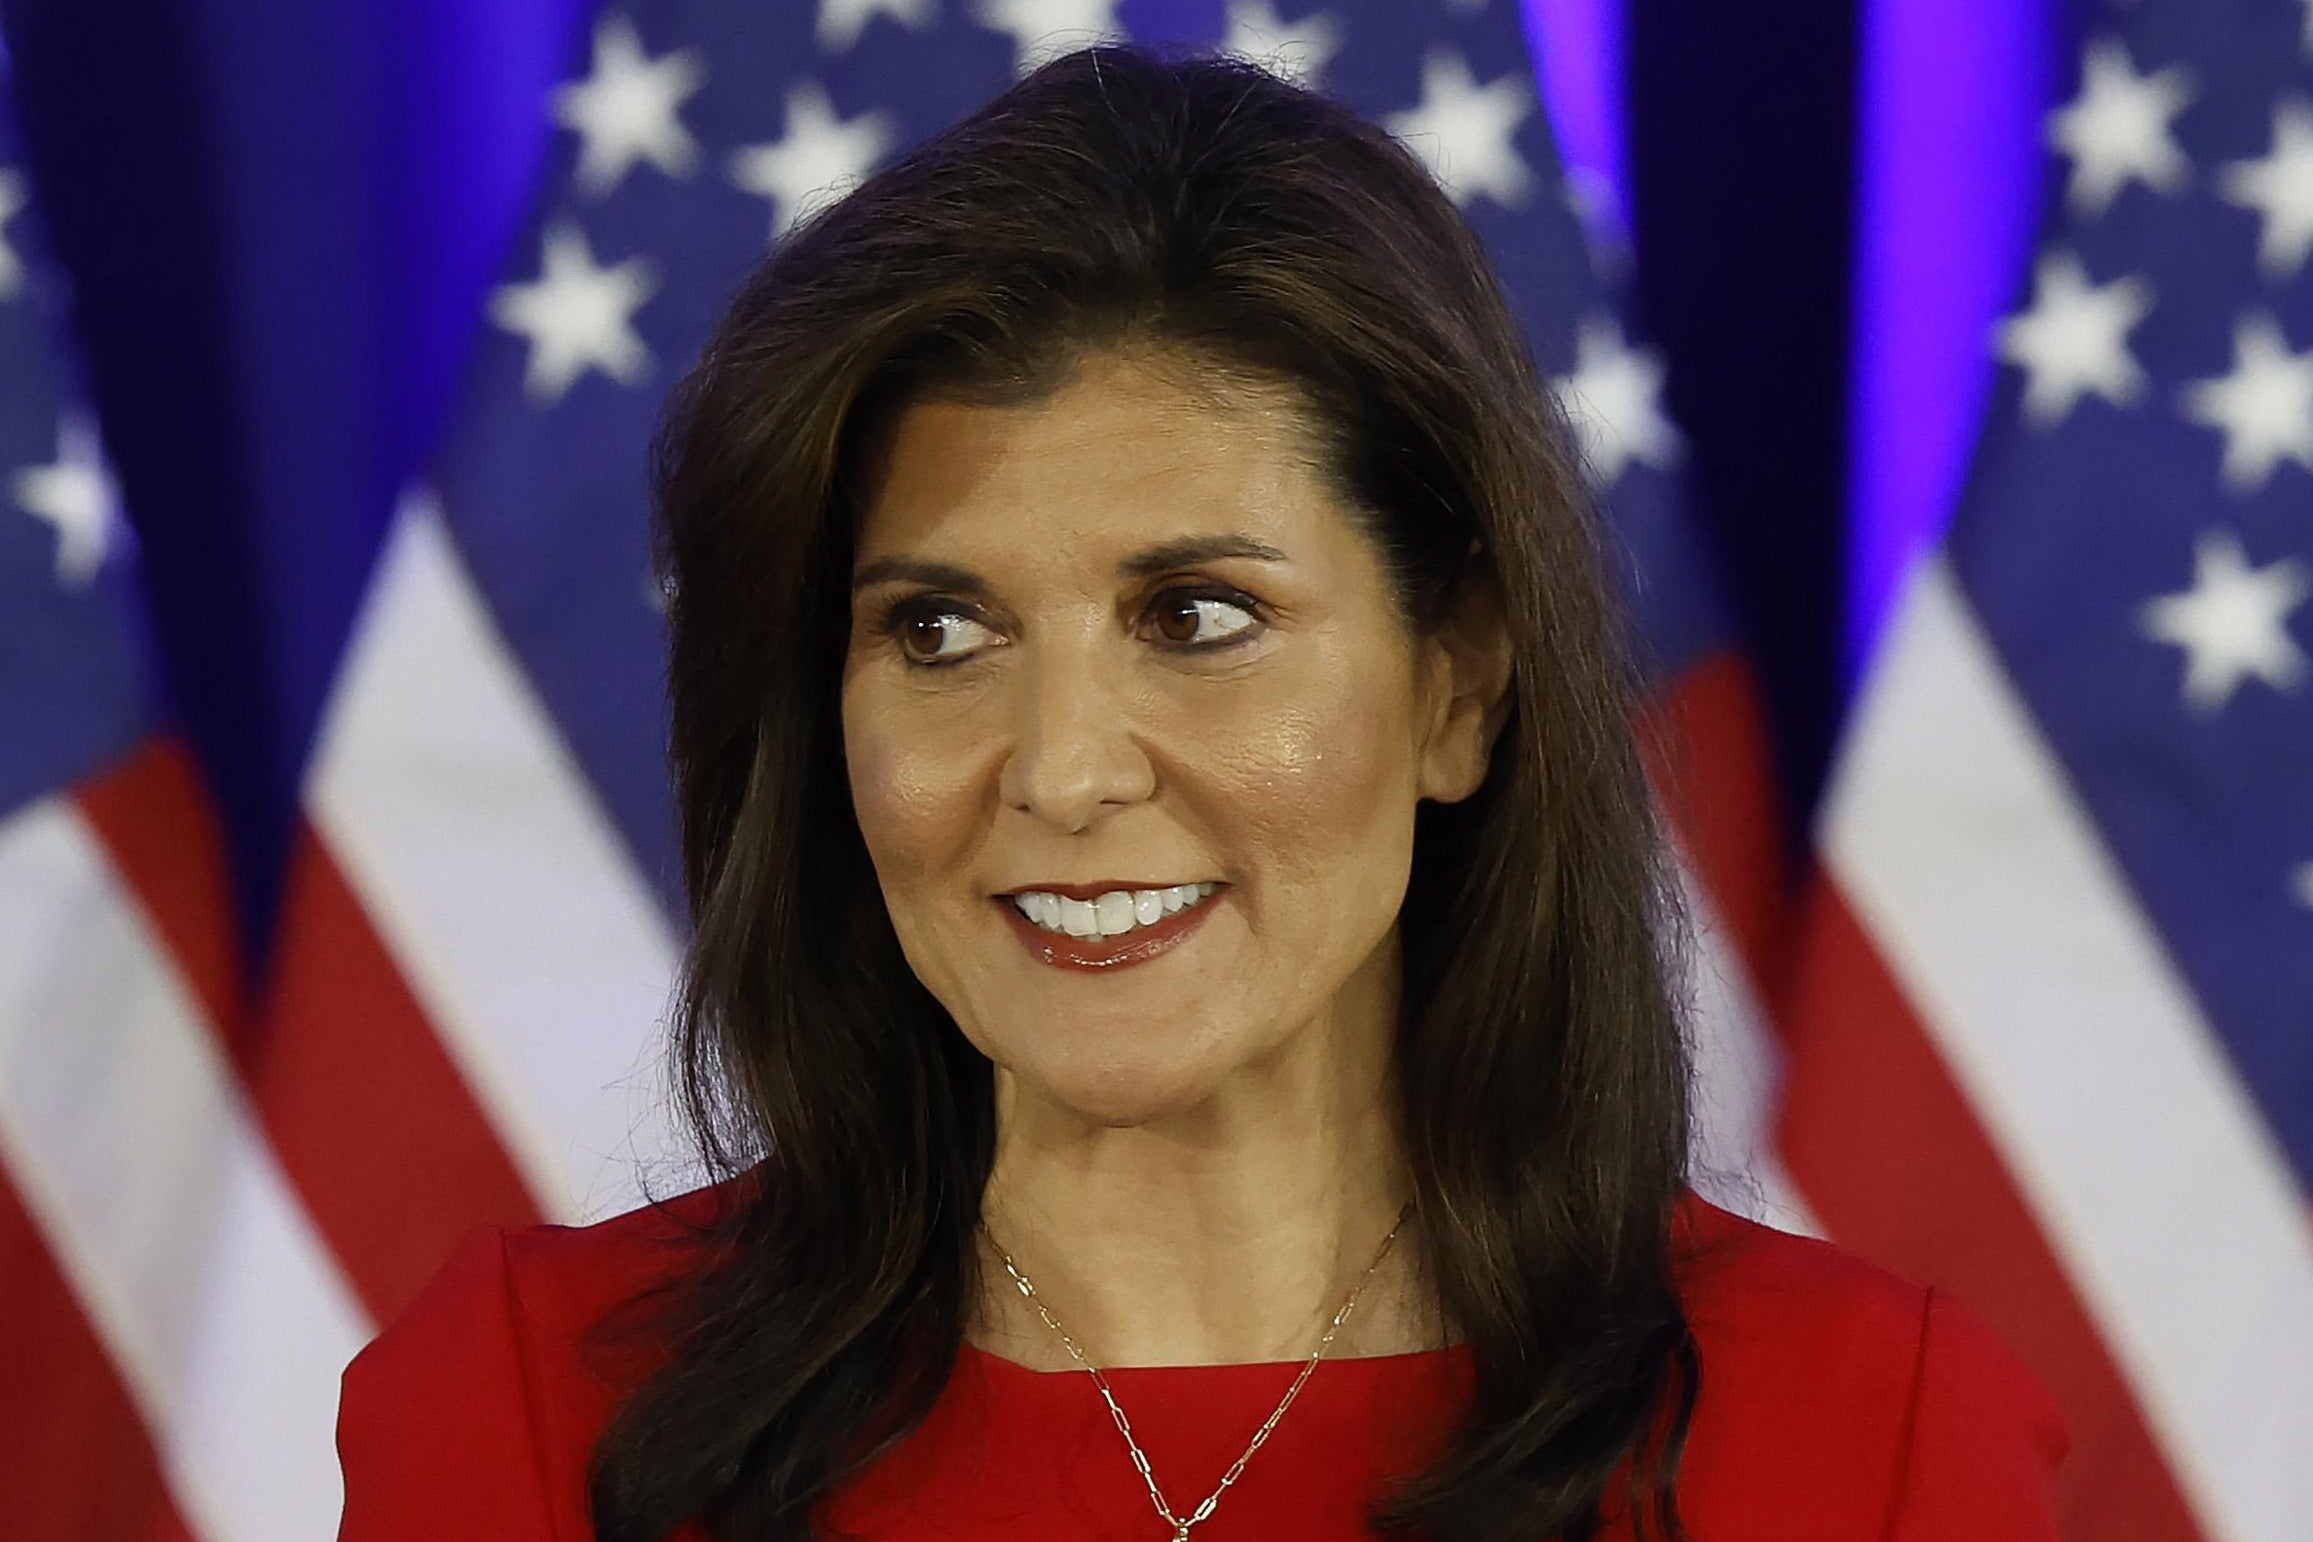 Nikki Haley suspended her campaign. Now what?